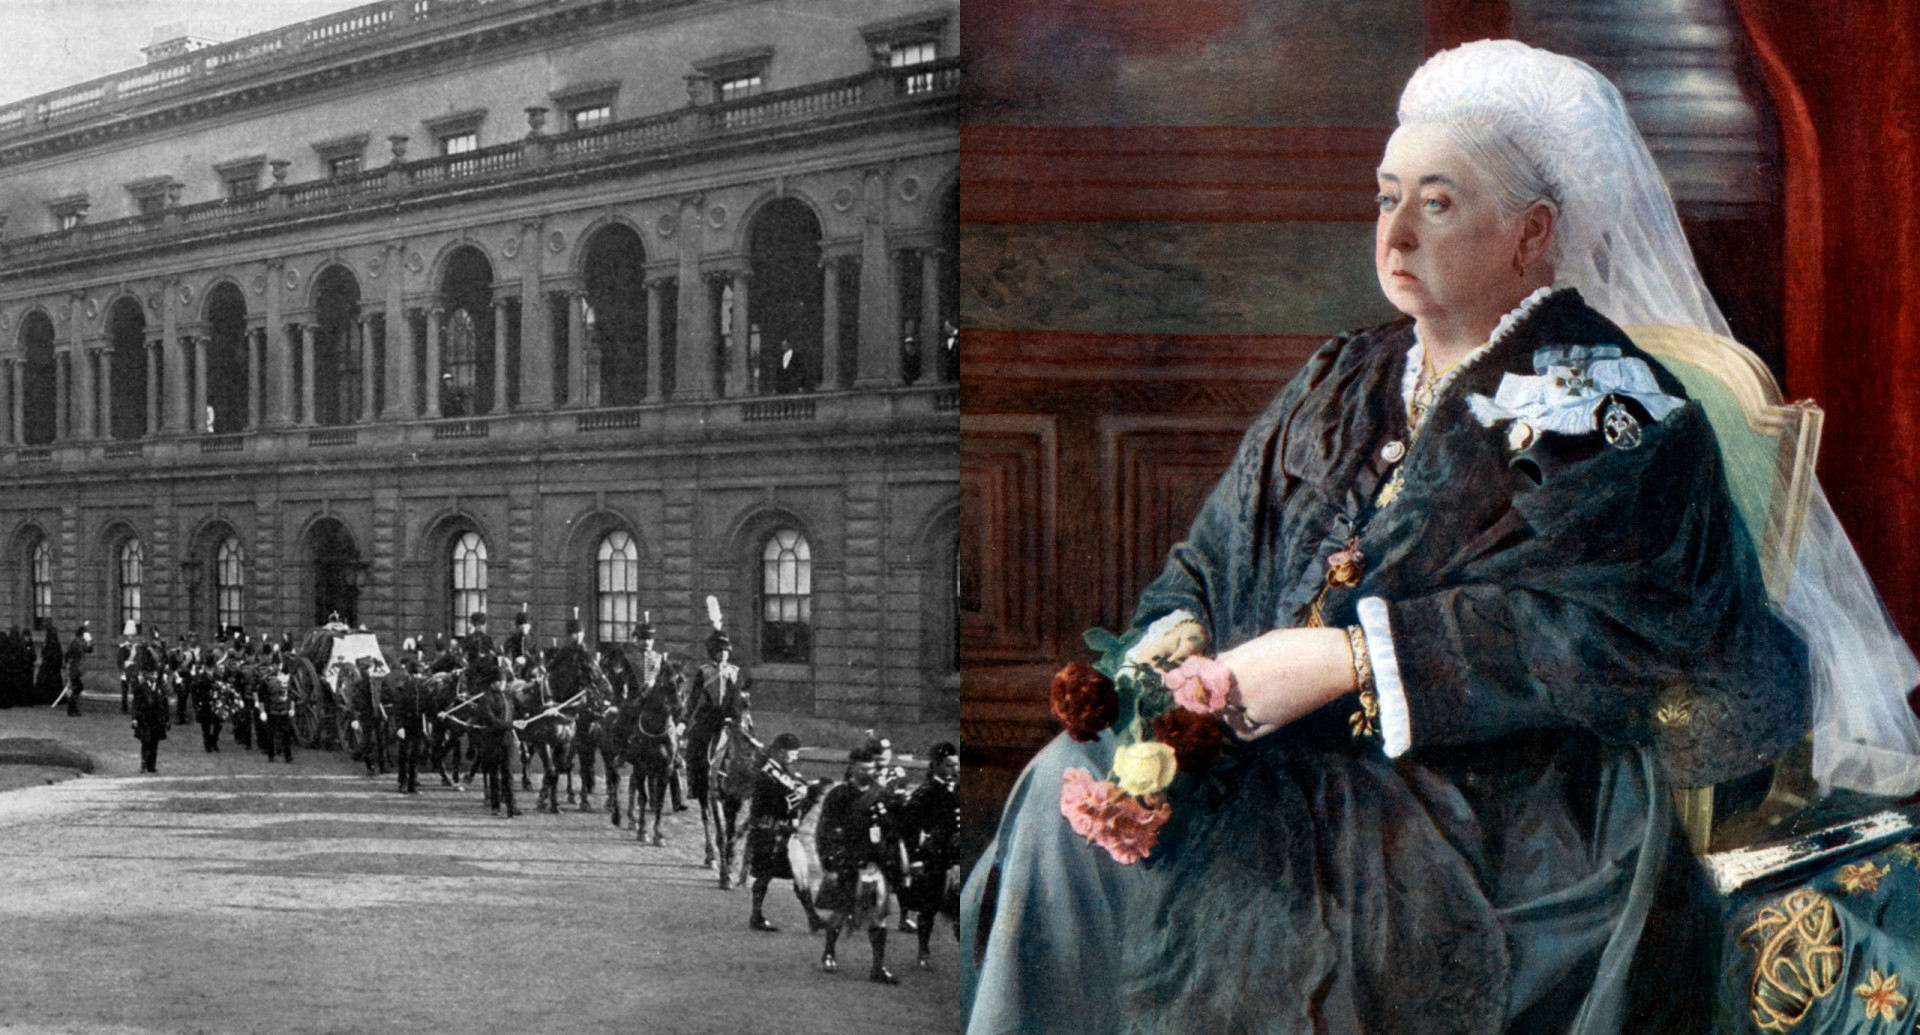 <p>Queen Victoria was one of the <a href="https://www.starsinsider.com/lifestyle/450359/the-royal-weddings-that-changed-european-history" rel="noopener">most influential monarchs</a> in British history. So much so that the long period she ruled was named the Victorian era. During this time, it was common to attach much greater significance to burials when someone died. Life expectancy was much shorter, and death was a part of everyday life. Attaching more ritual and meaning to the manner of burial helped to deal with this difficult reality. <br><br>Many people left instructions for their funeral and burial, and Queen Victoria was no exception. In fact, the woman left a detailed 12-page manual! She was known for her eccentricities, and this certainly comes across in her last wishes...</p> <p>Intrigued? Then click through the gallery to learn more about the strange burial requests of Queen Victoria.</p><p>You may also like:<a href="https://www.starsinsider.com/n/175806?utm_source=msn.com&utm_medium=display&utm_campaign=referral_description&utm_content=477973v8en-sg"> George Clooney and other actors who totally transformed their bodies for a movie</a></p>